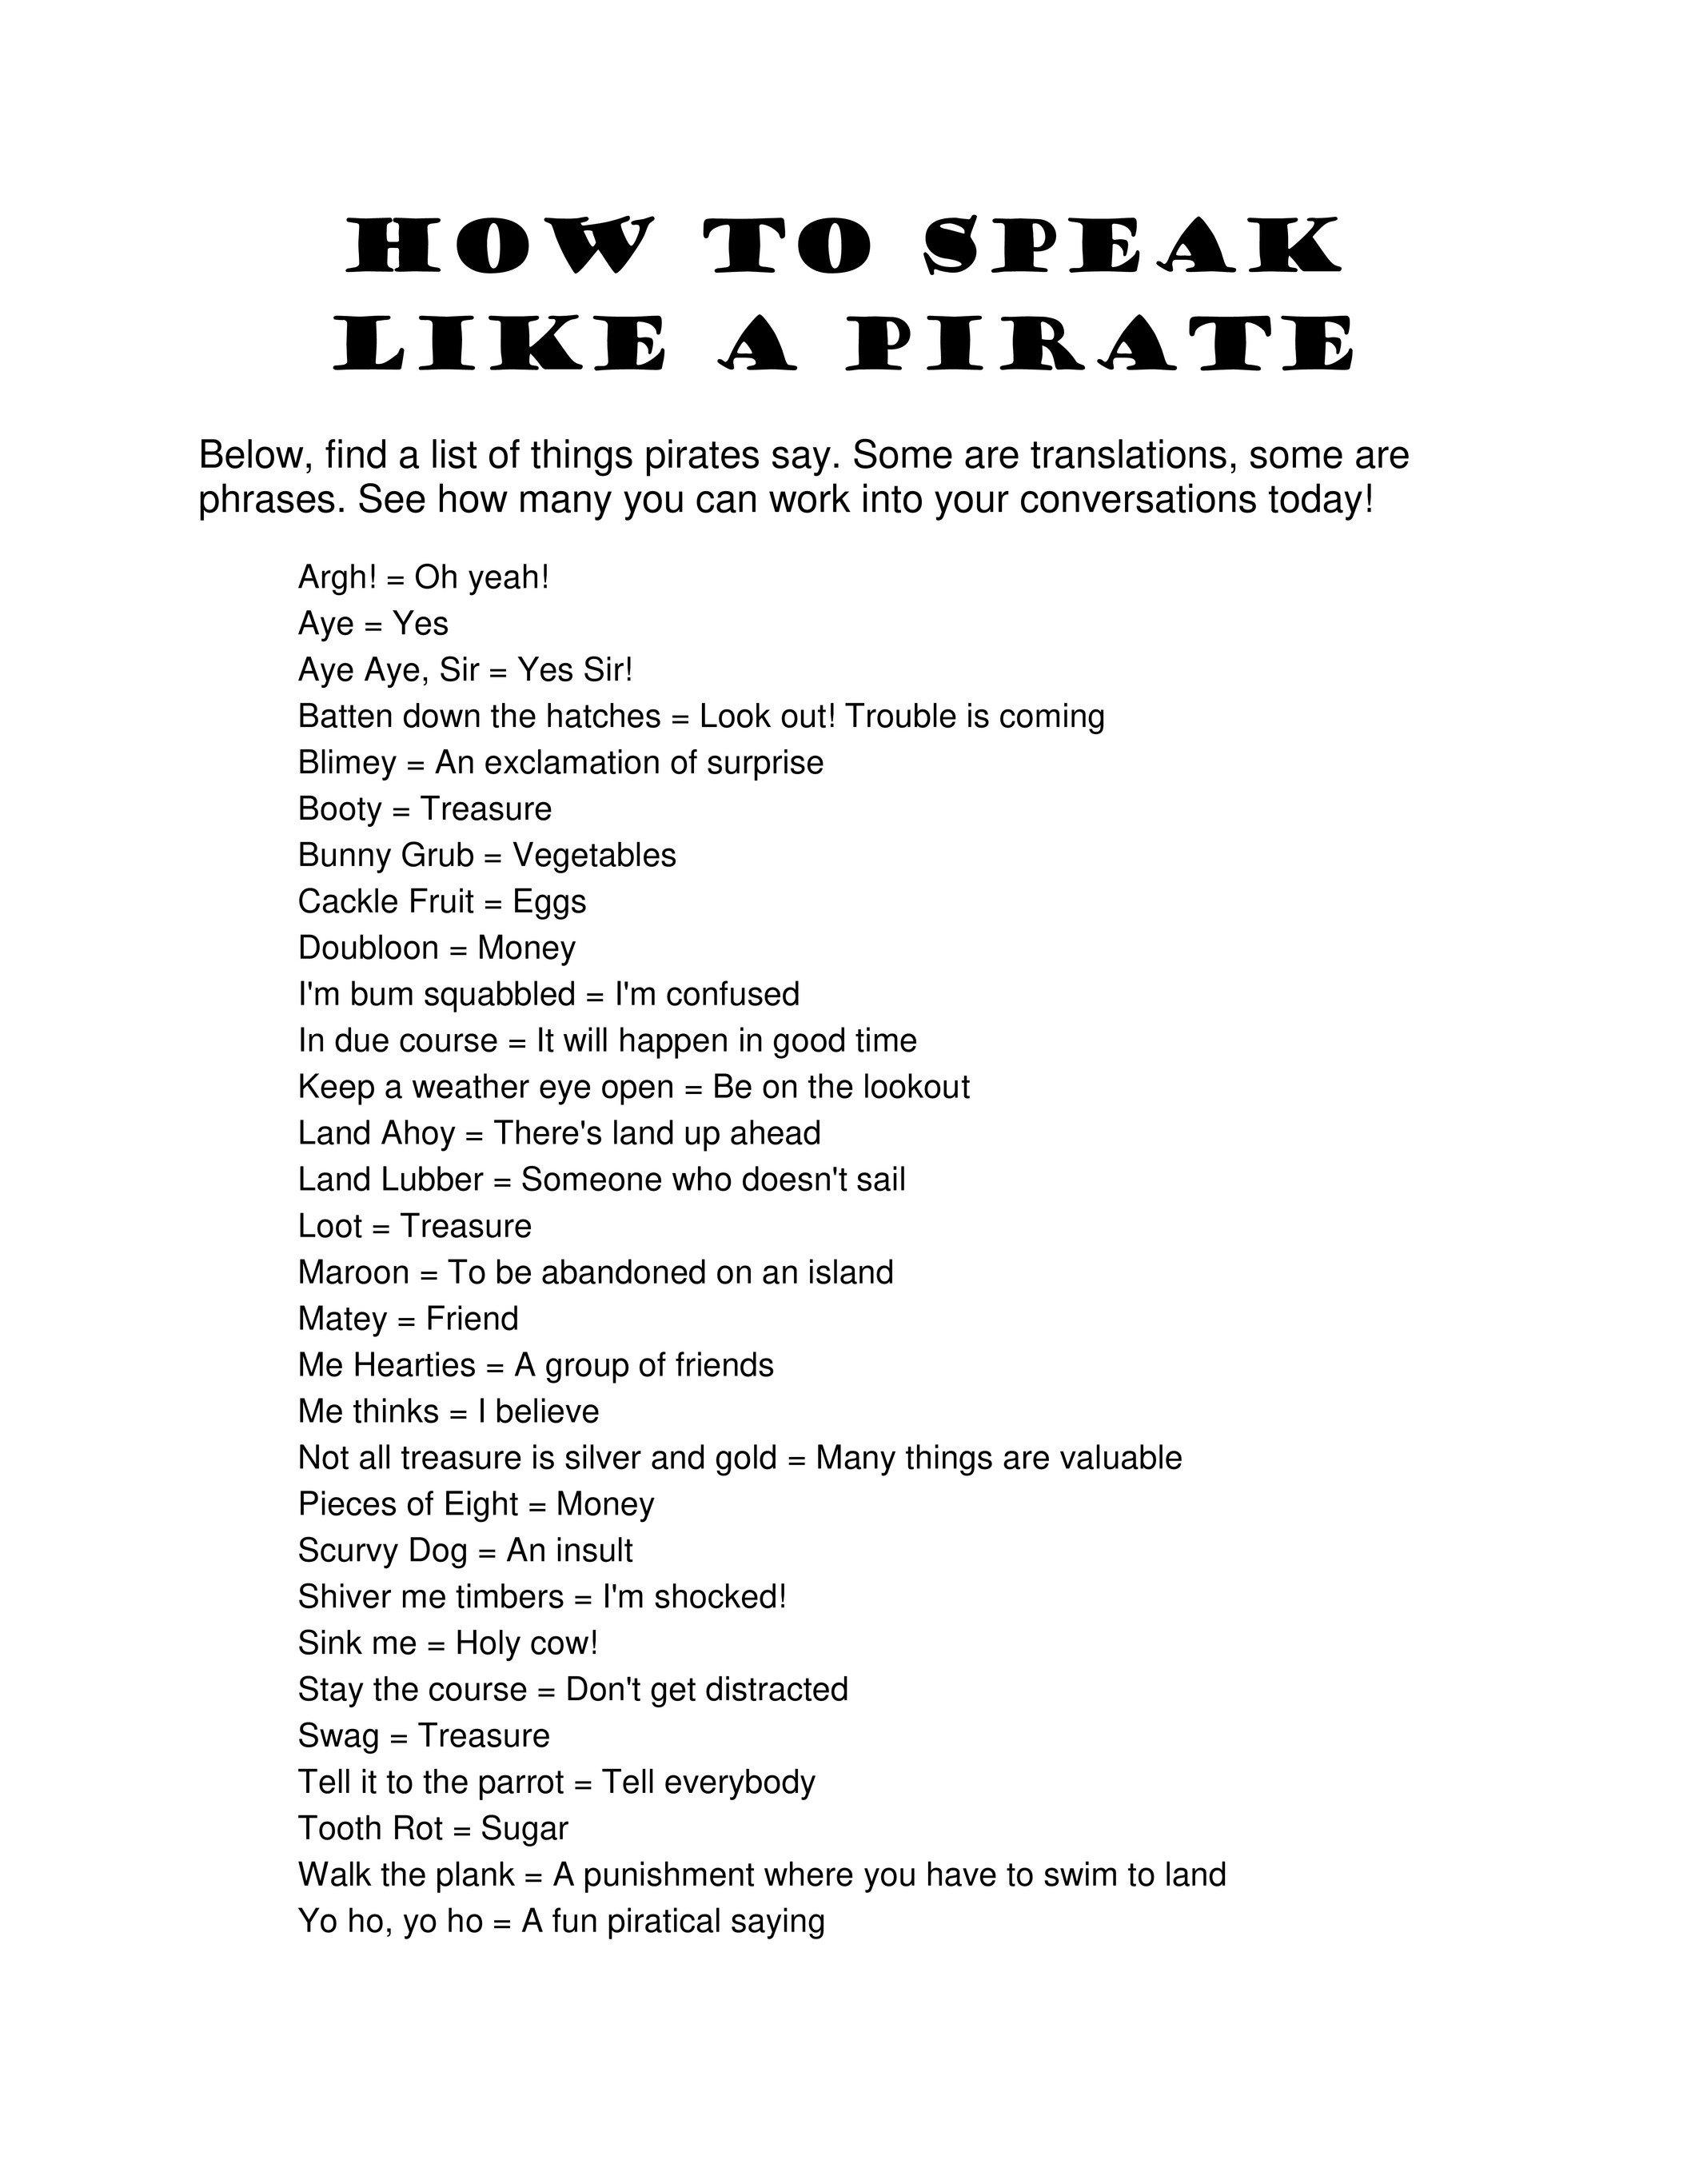 How To Talk Like A Pirate: 20 Pirate Words